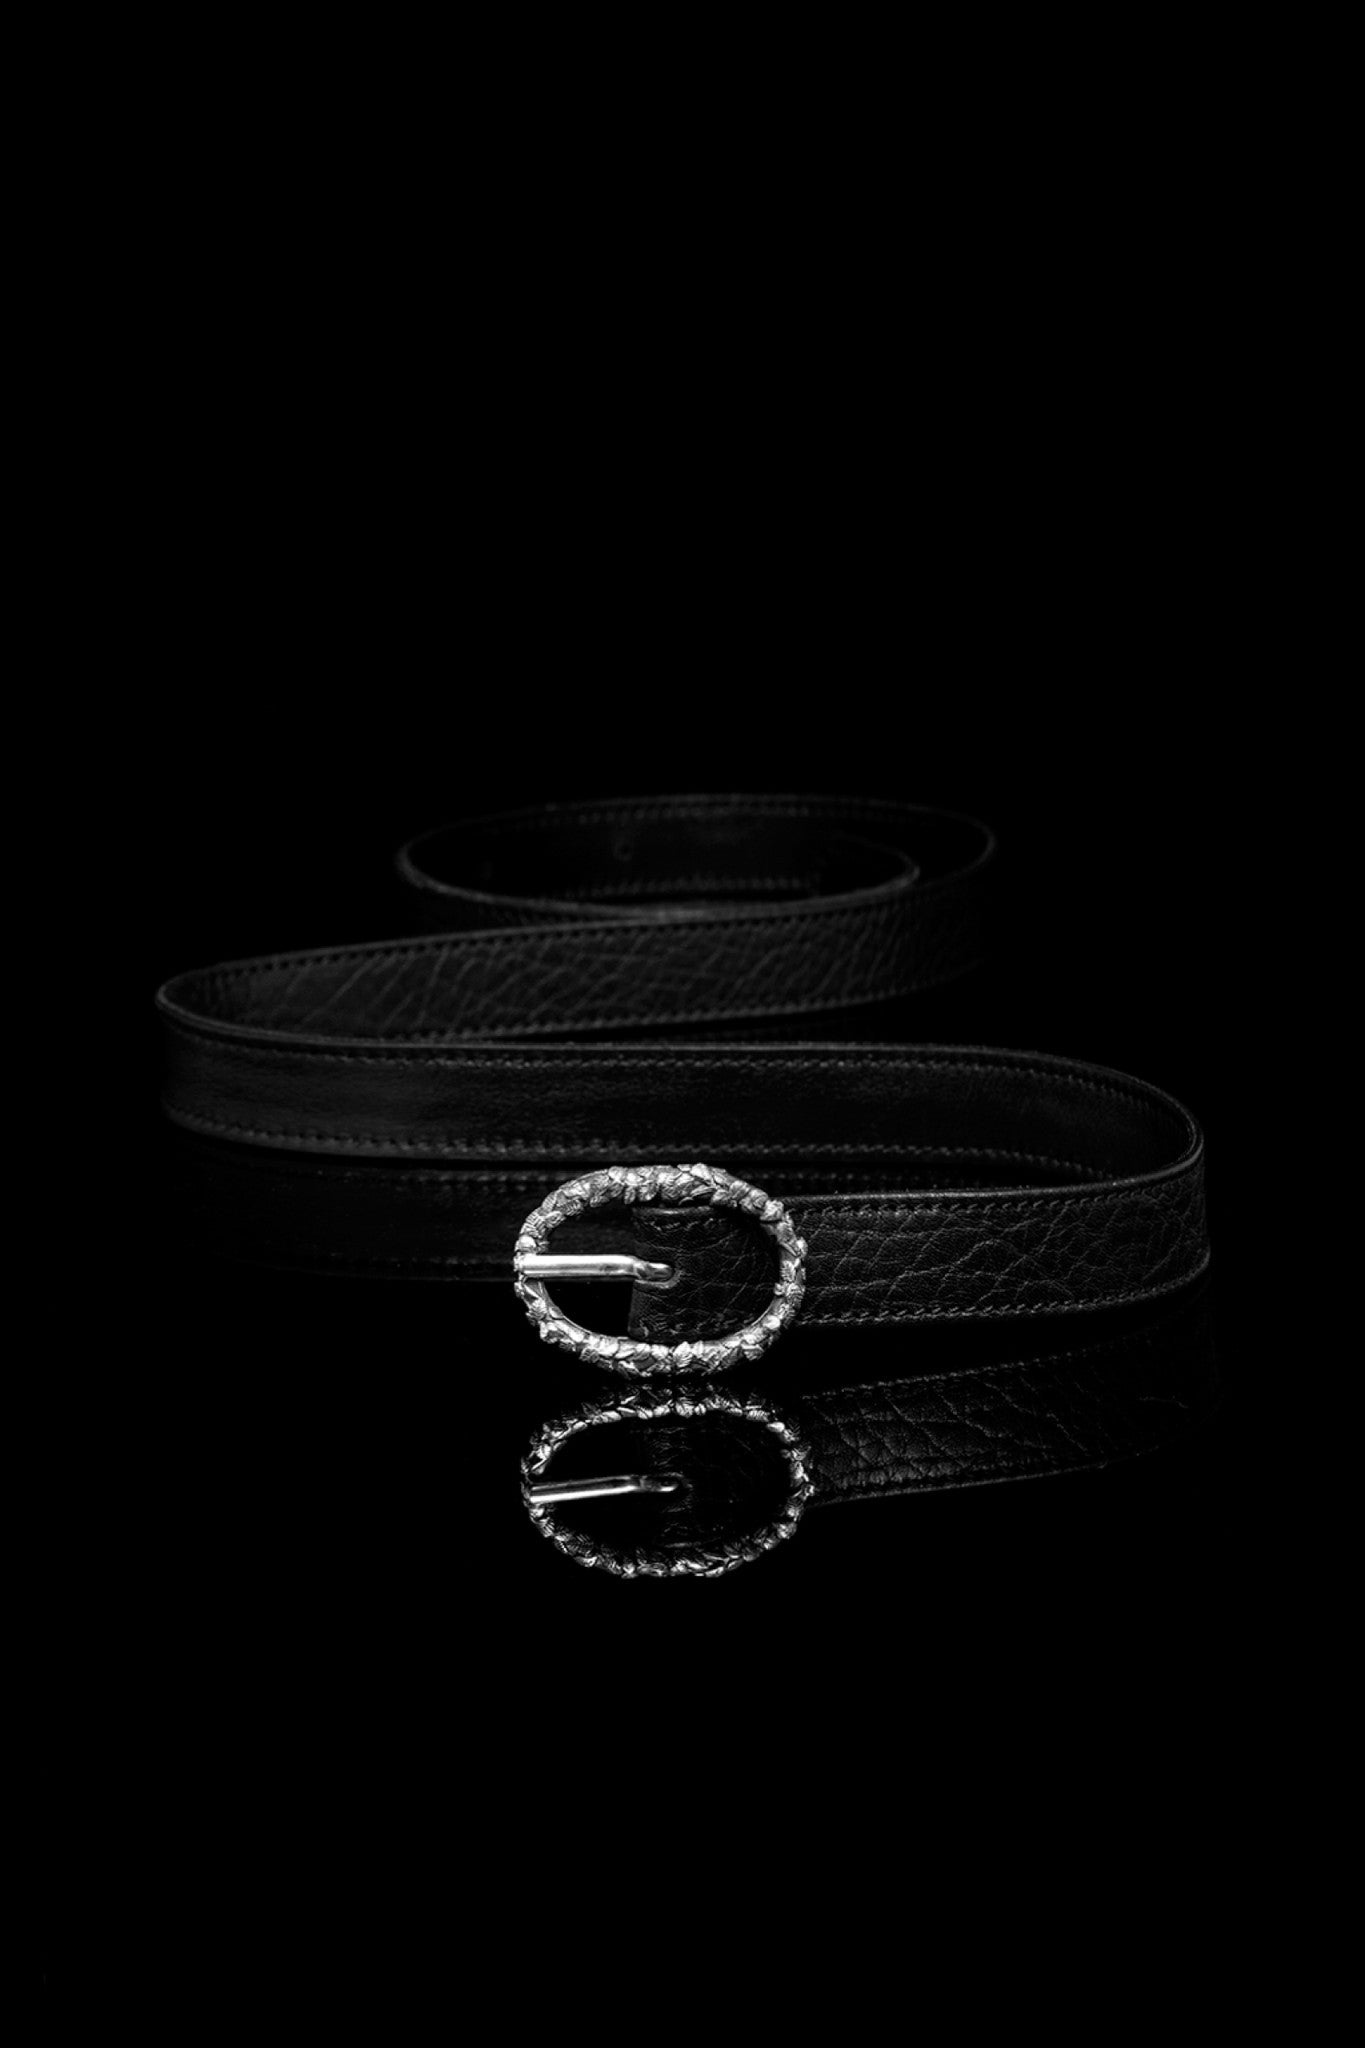 Ugo Cacciatori, Silver, Accessories, Sterling Silver + Leather, Belt, Black Wrinkled Leather